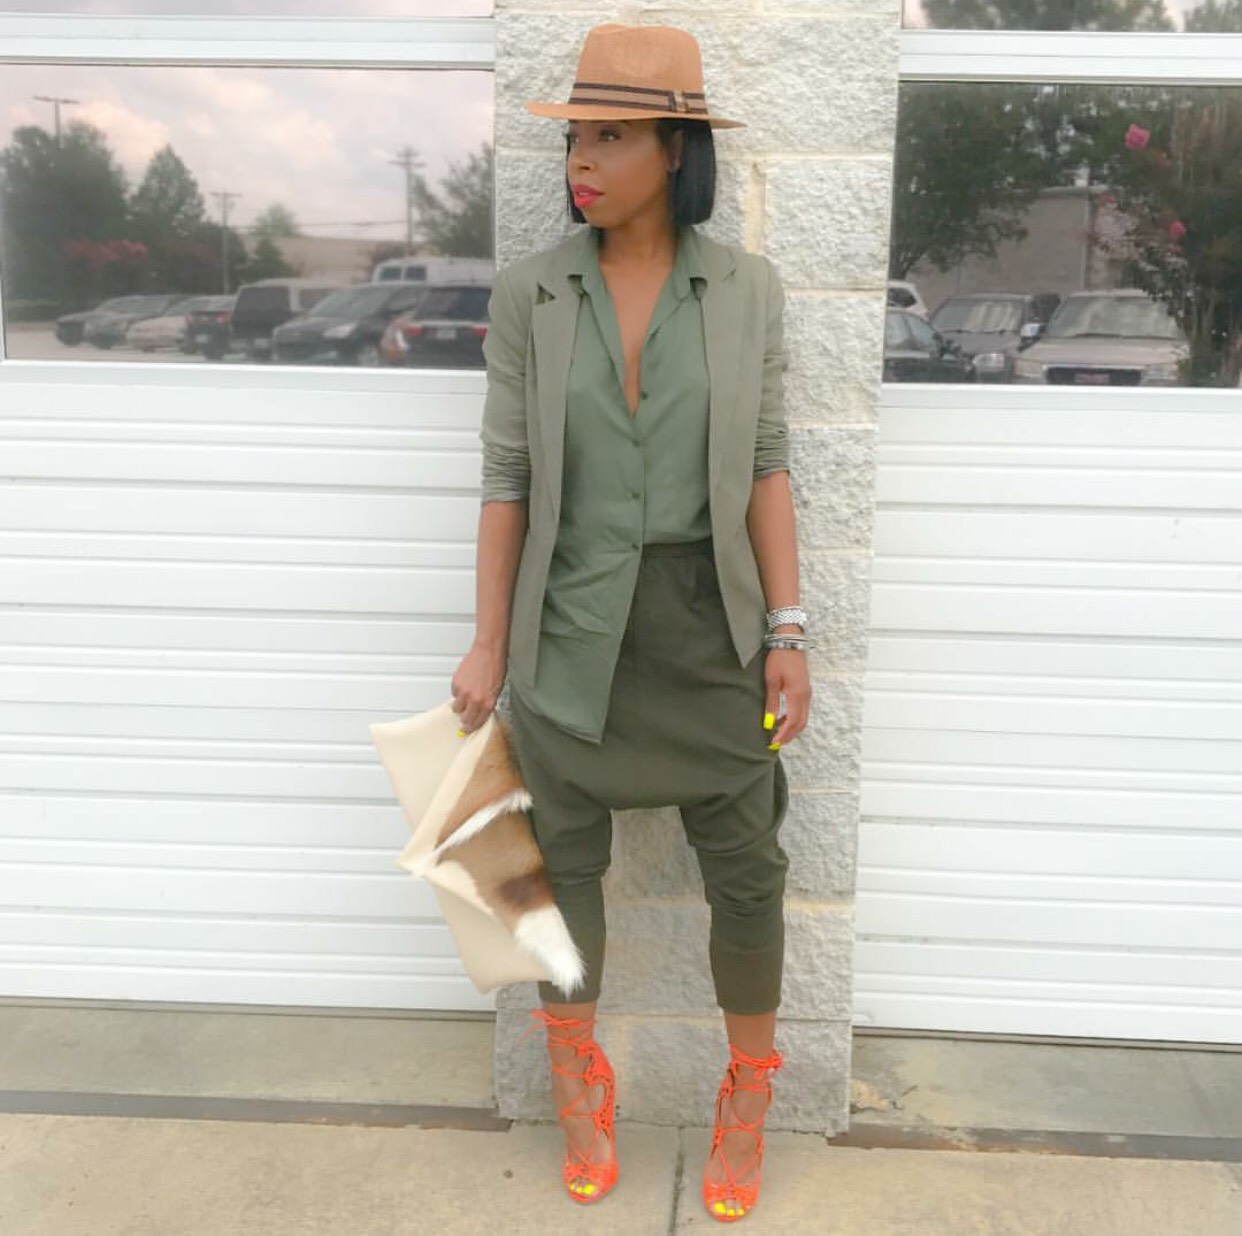 Fashion Bombshell of the Day: Zamar from ATL